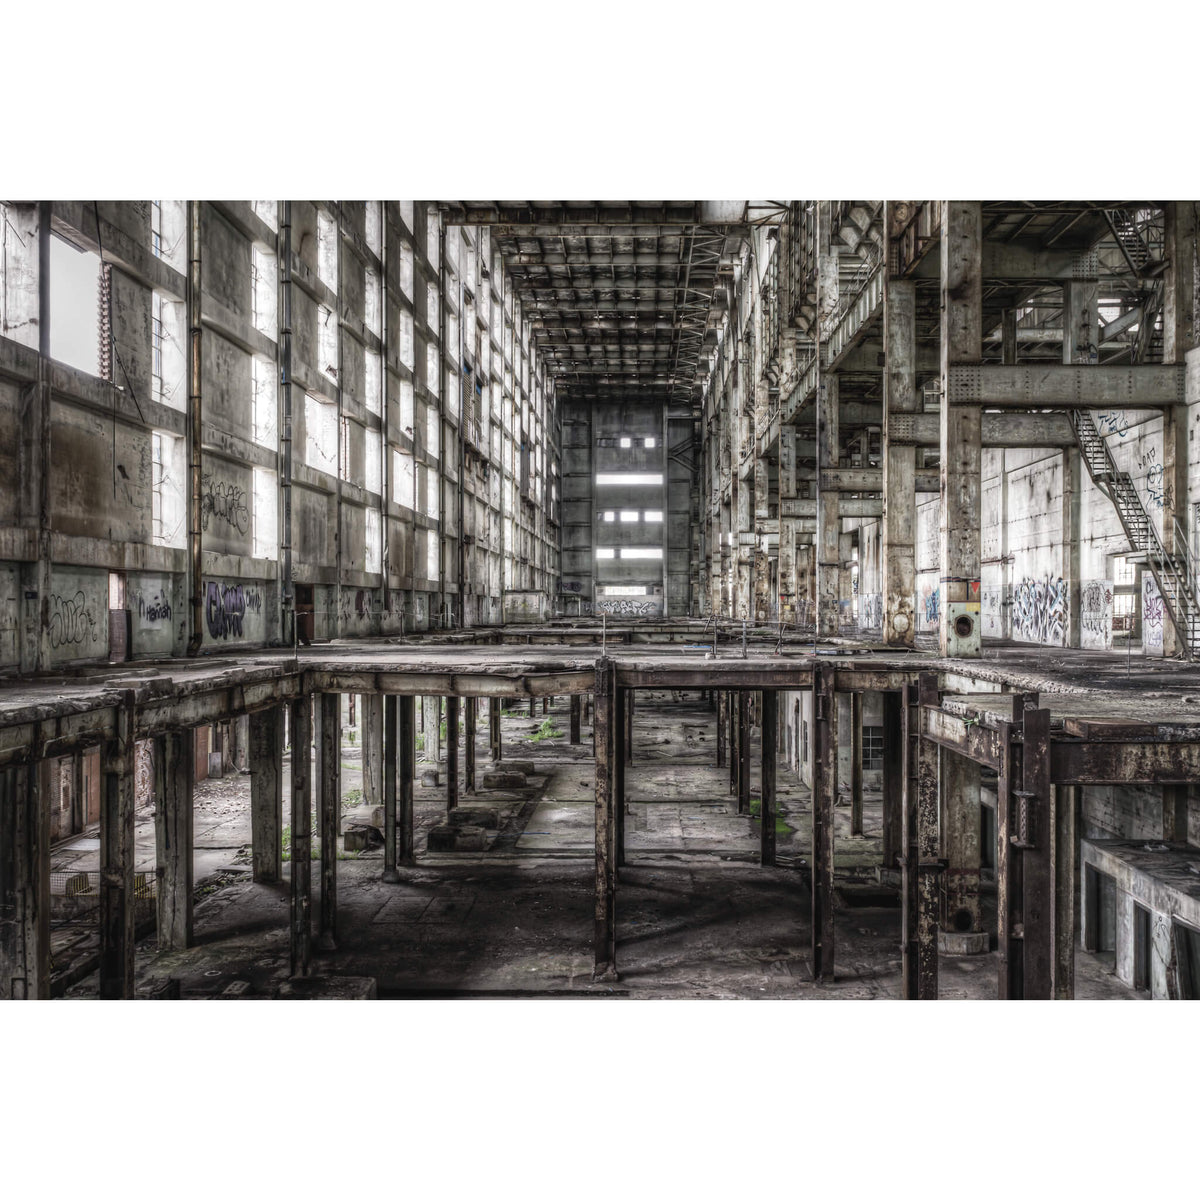 Boiler House Looking From A Station To B | Wangi Power Station Fine Art Print - Lost Collective Shop